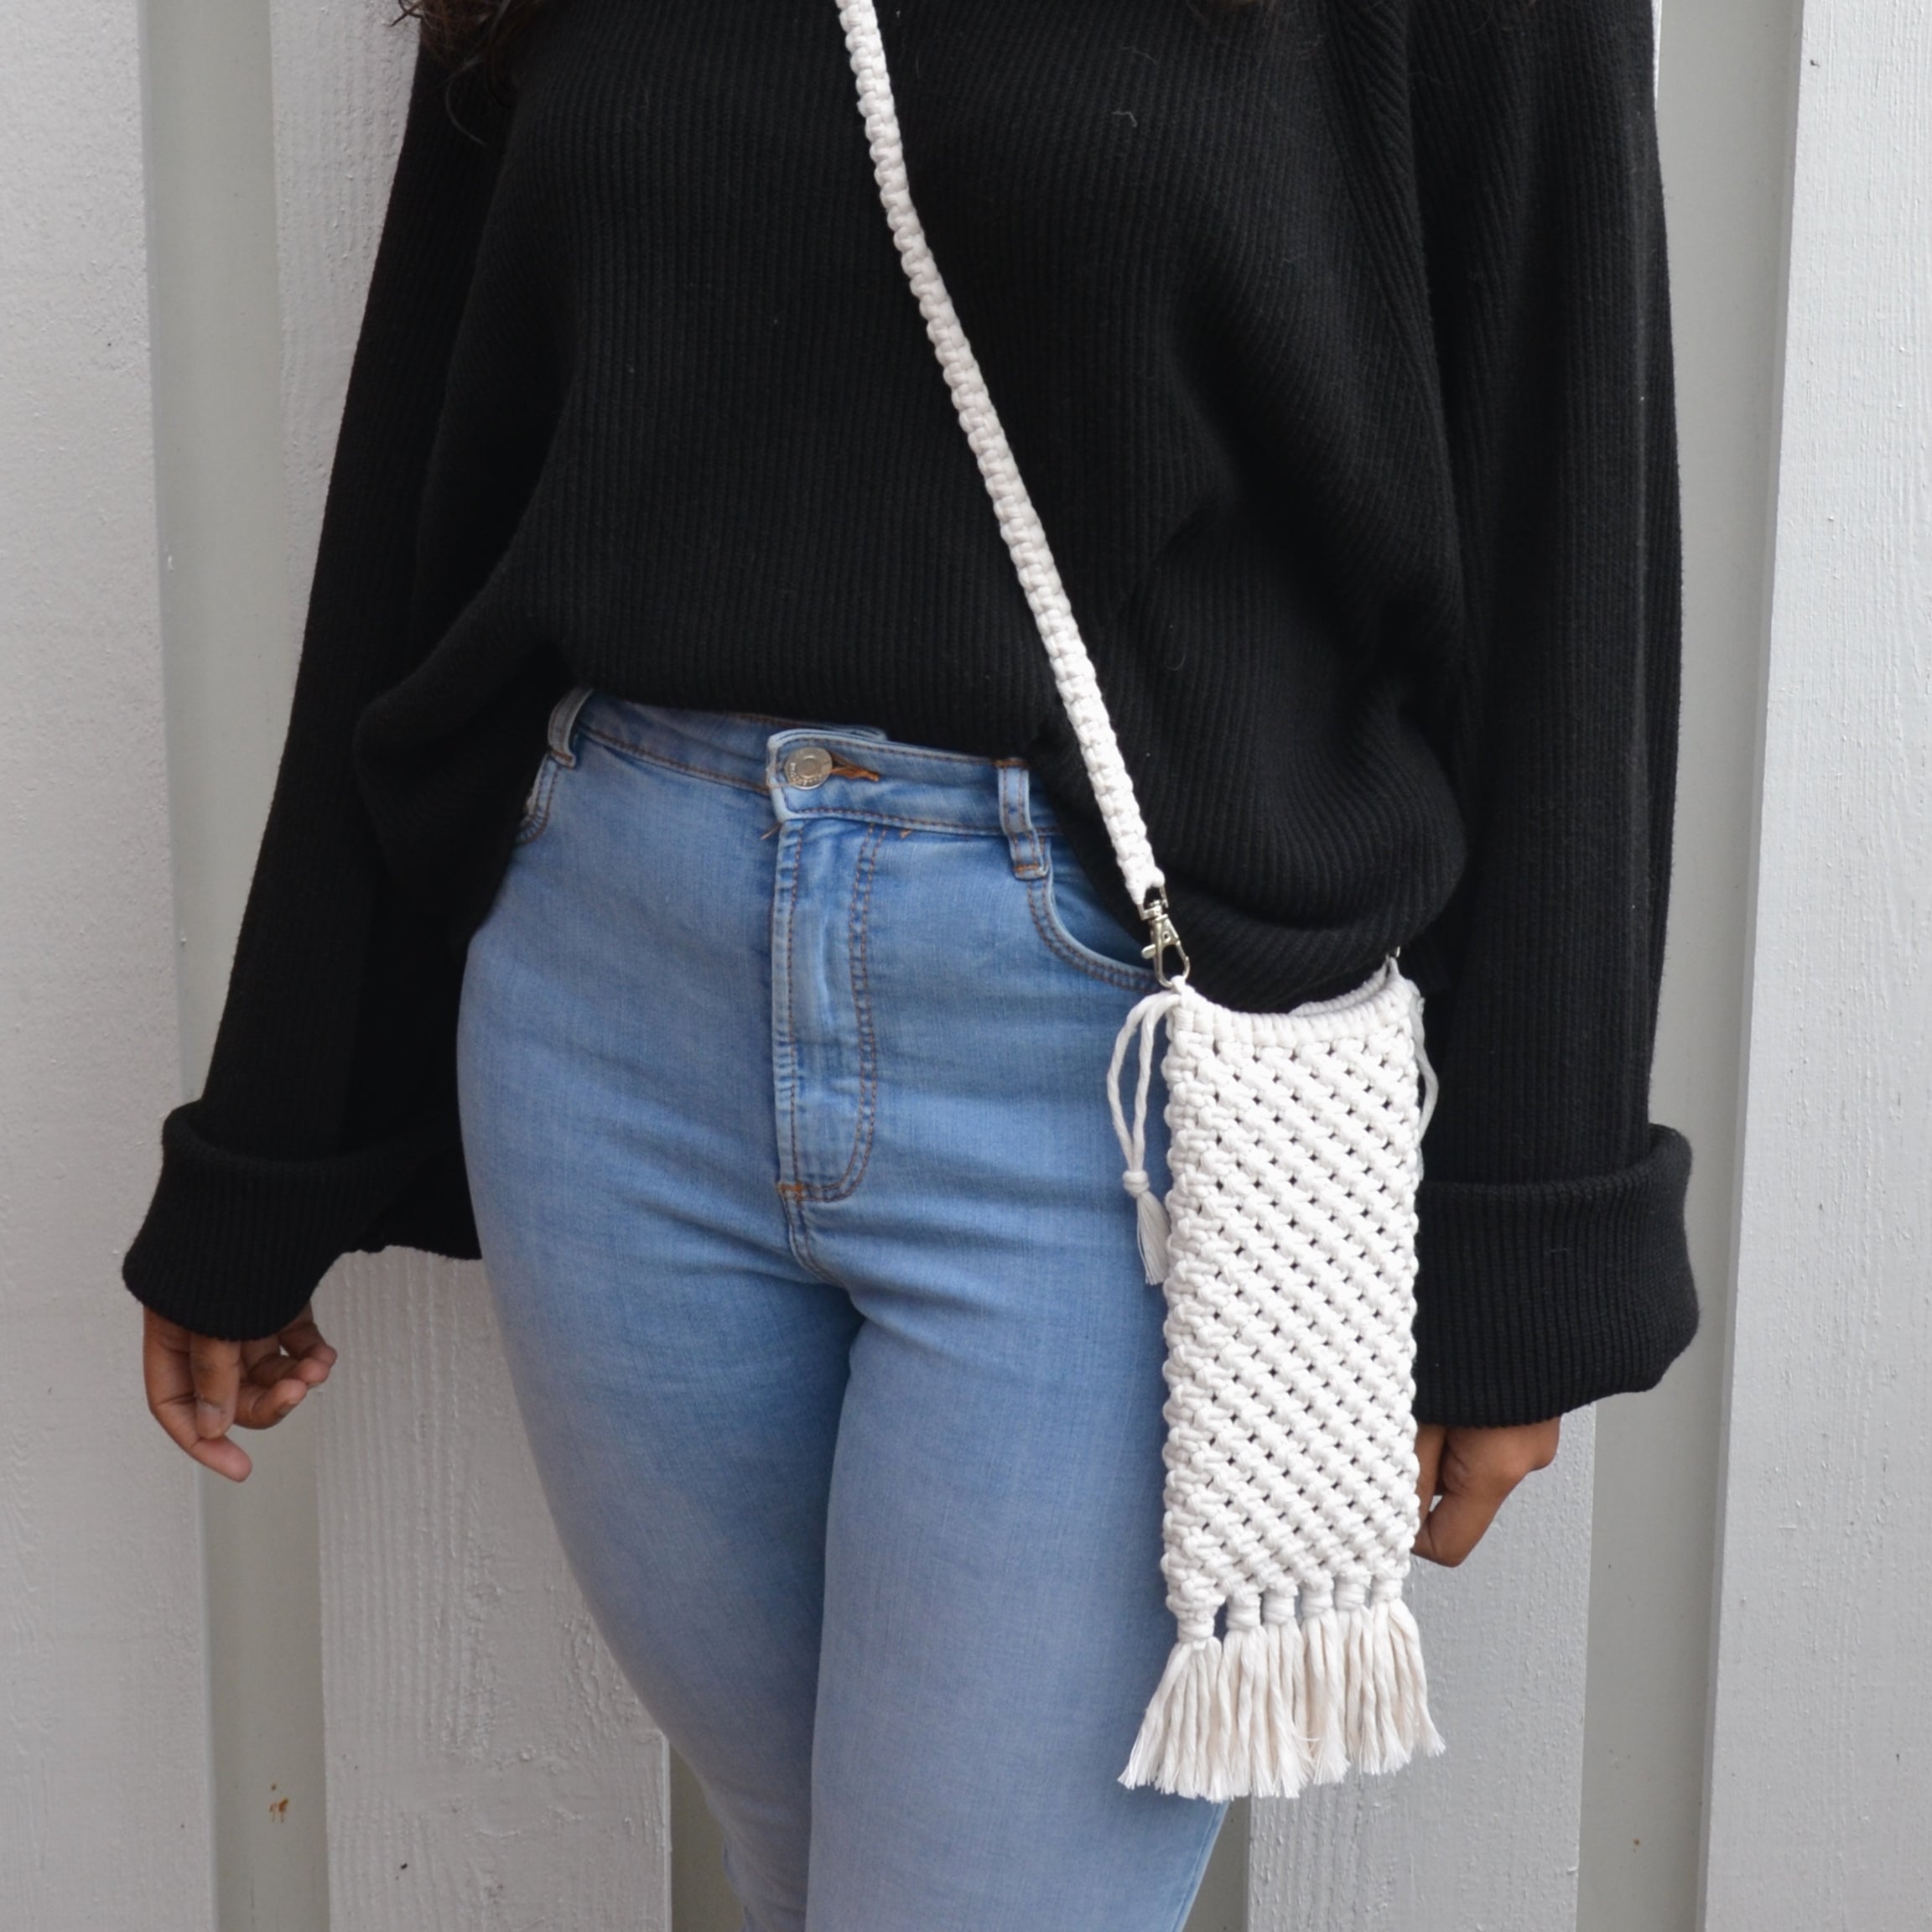 A woman carrying a white crossbody macrame bag with fringe detailing and a shoulder strap